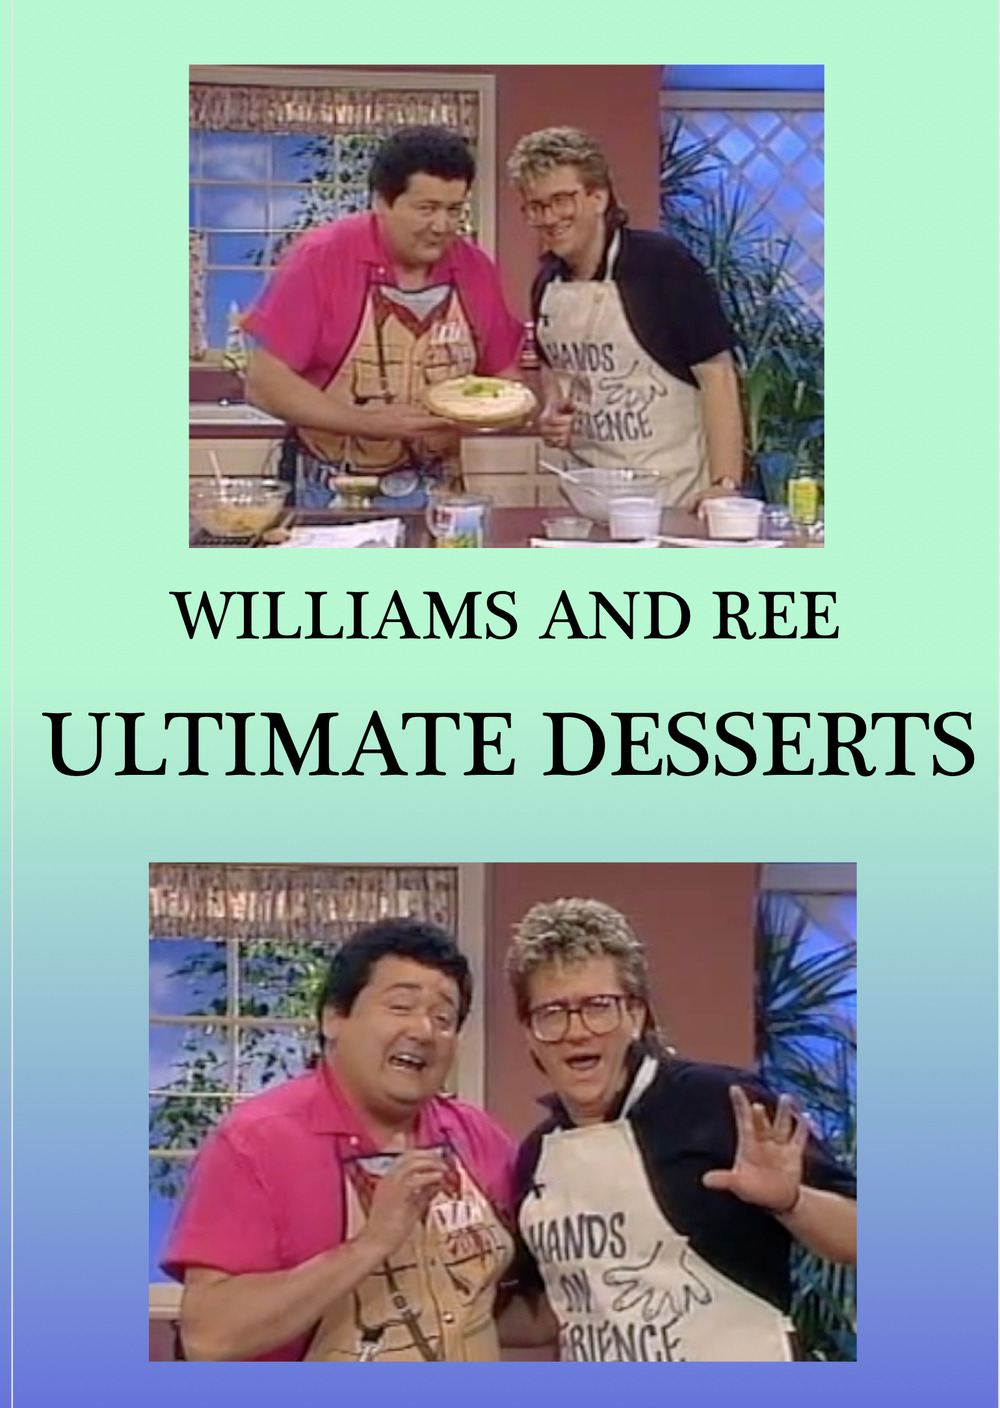 WILLIAMS AND REE ULTIMATE DESSERTS DVD